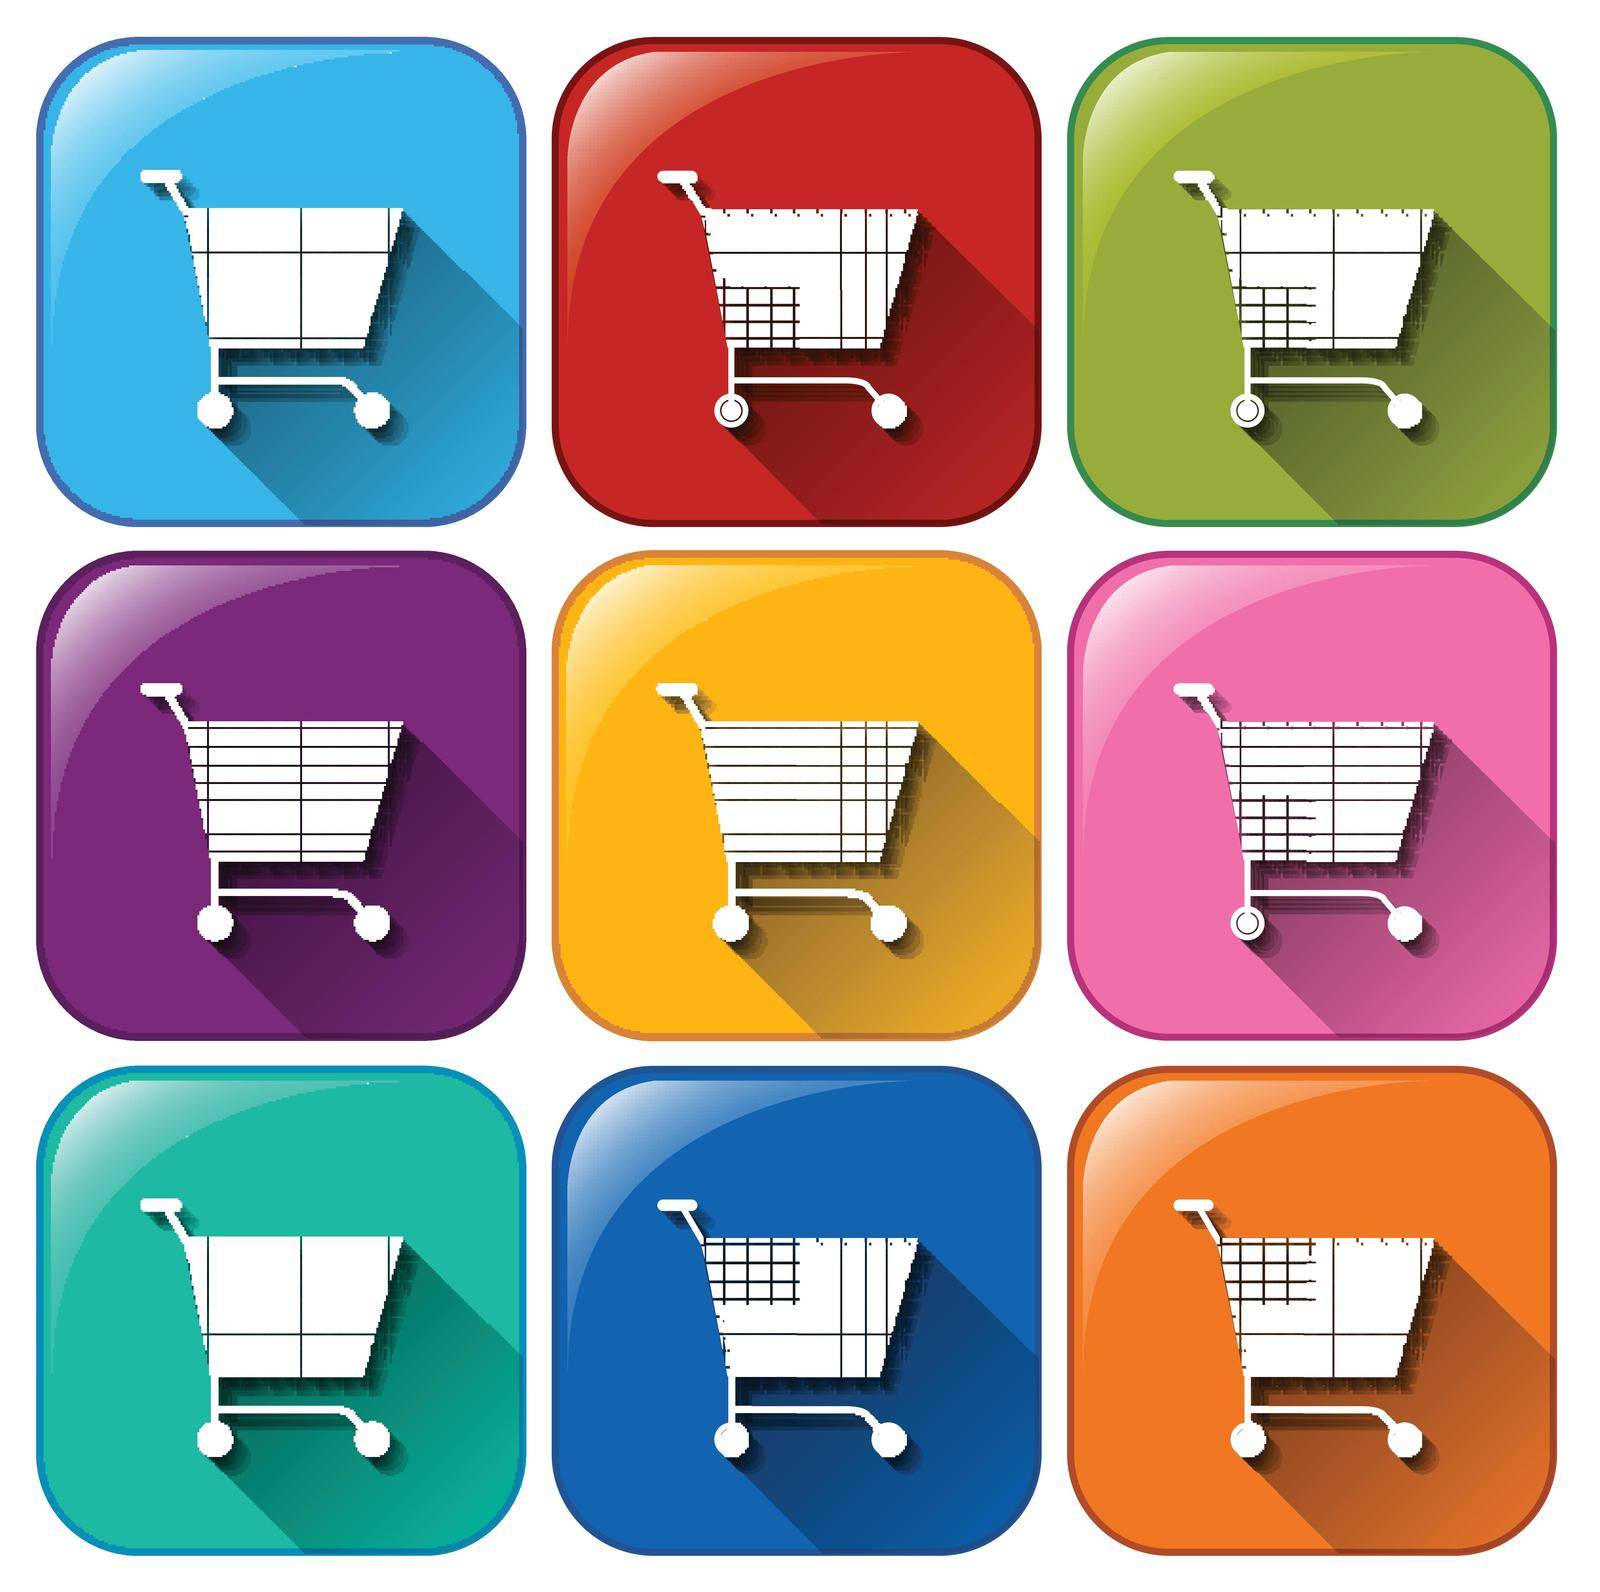 Illustration of the round icons with grocery carts on a white background